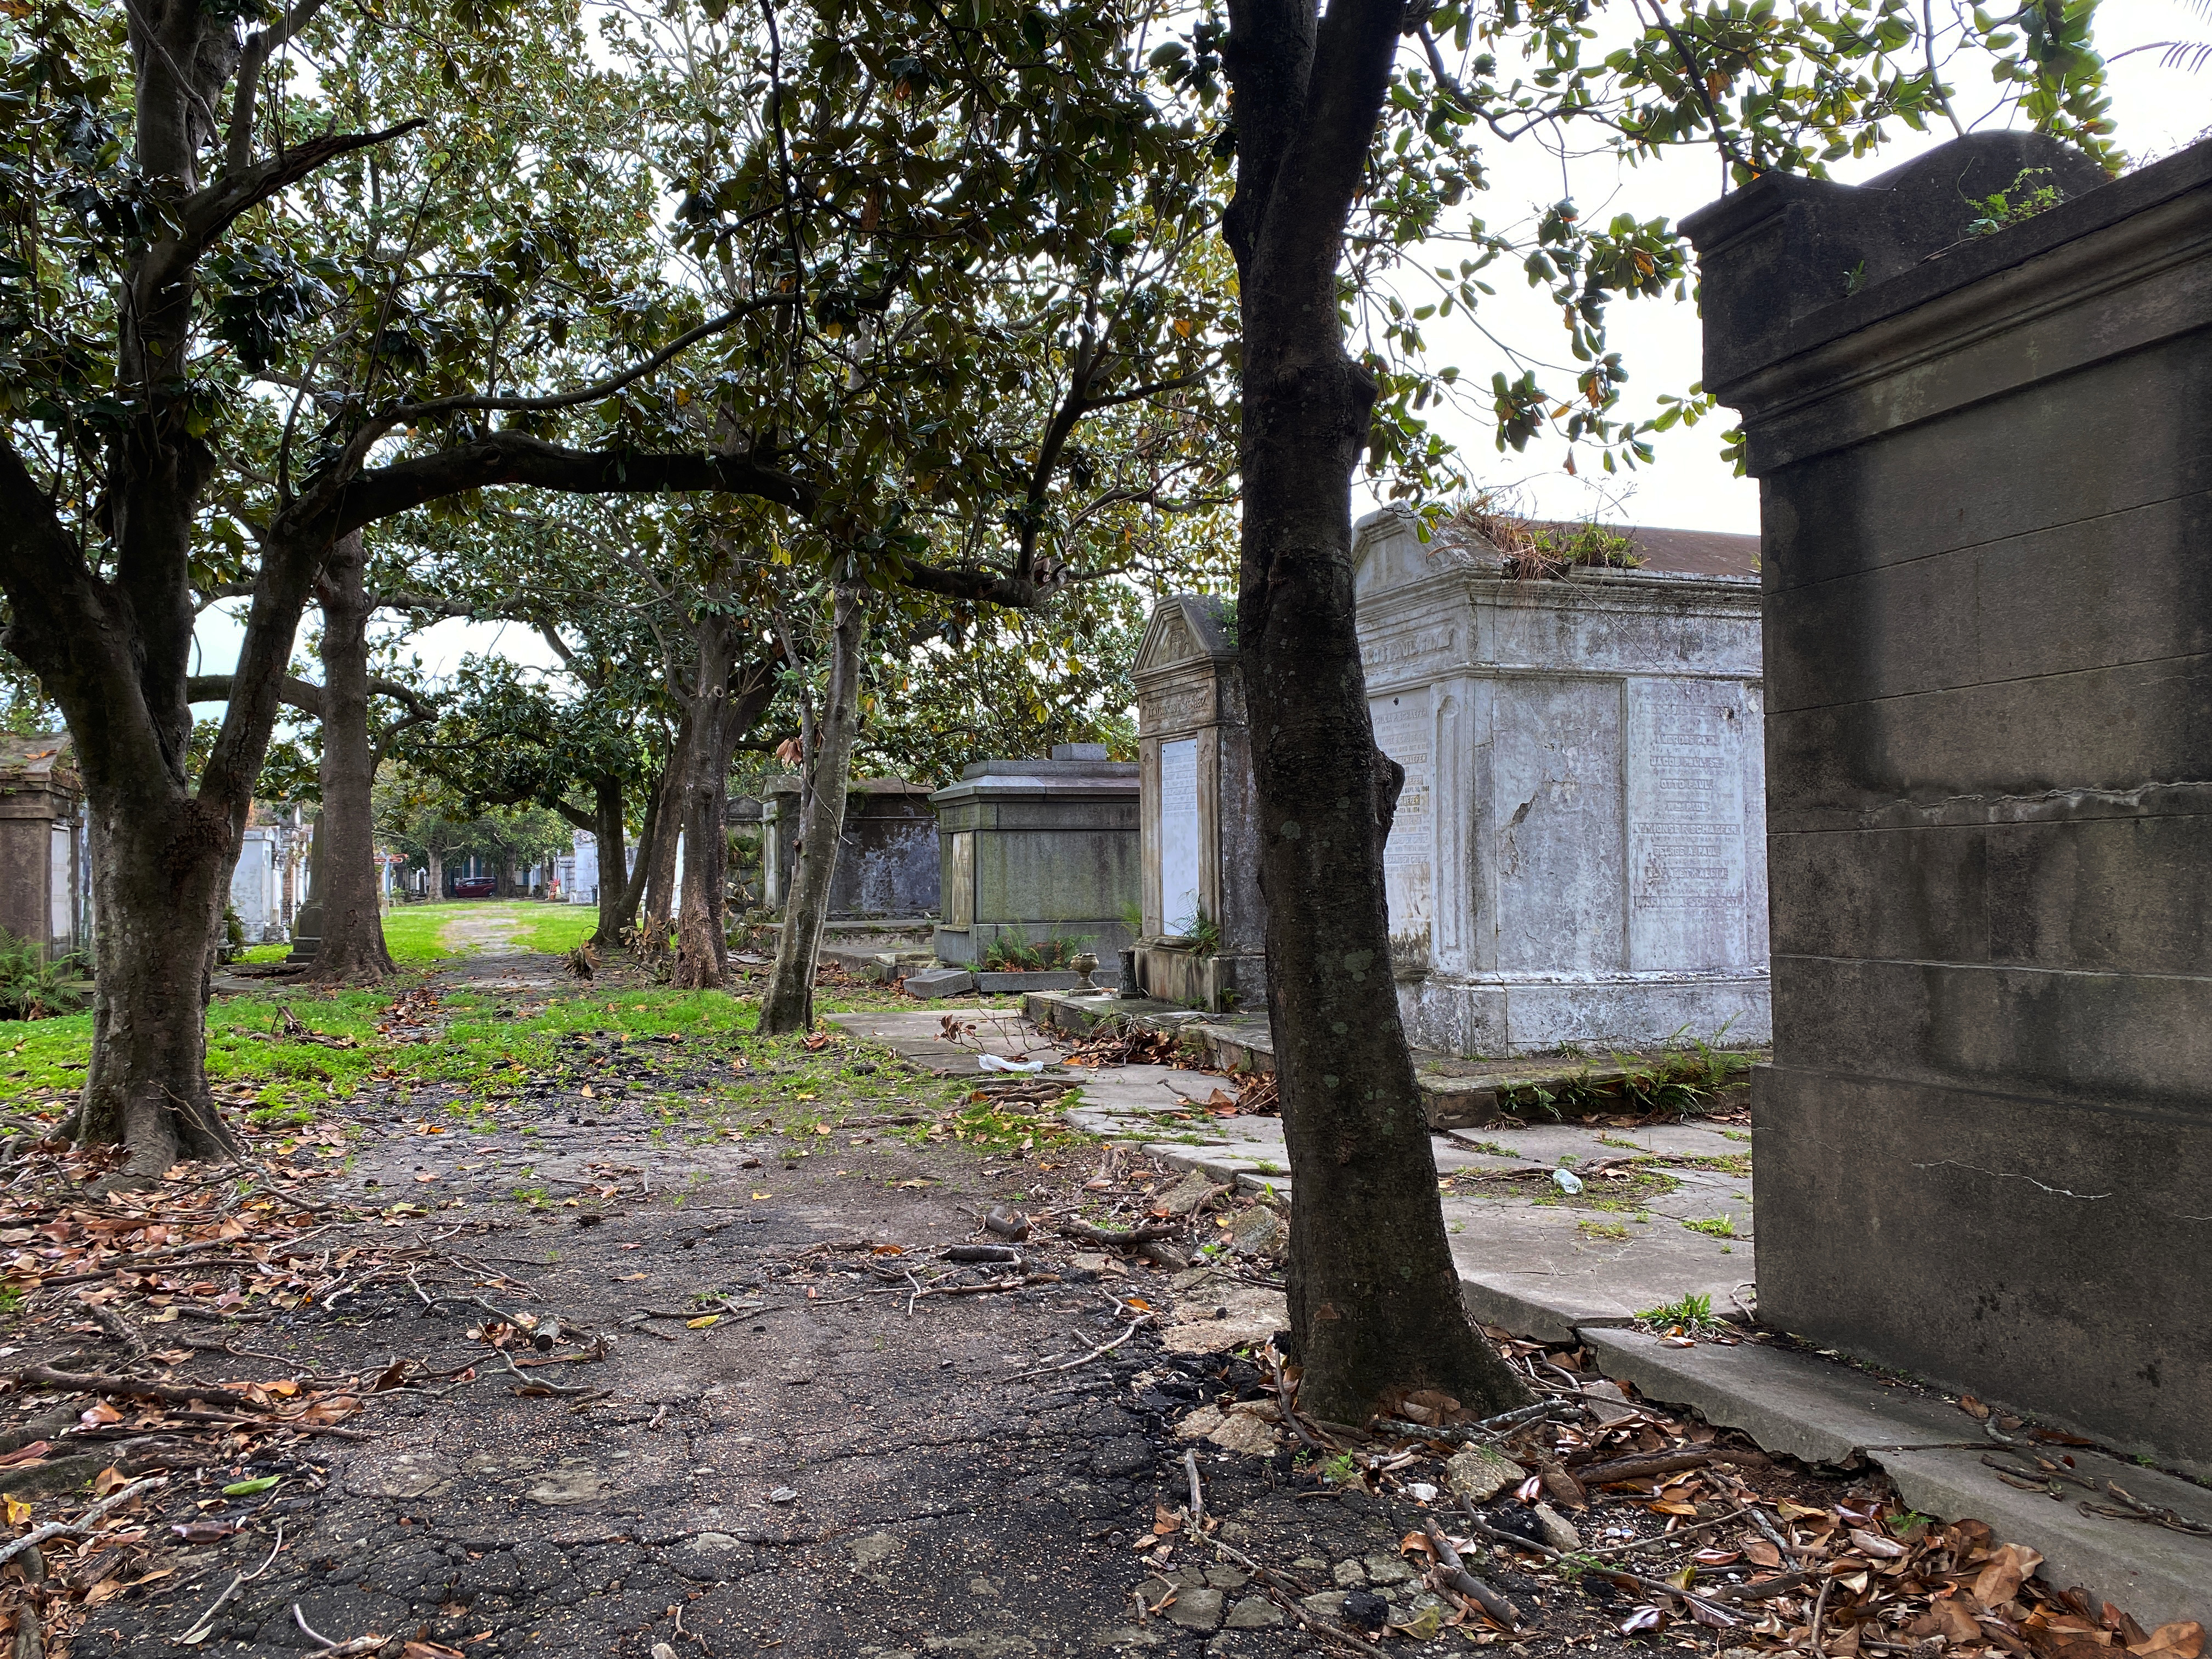 A path lined with trees through a cemetery full of weathered crypts